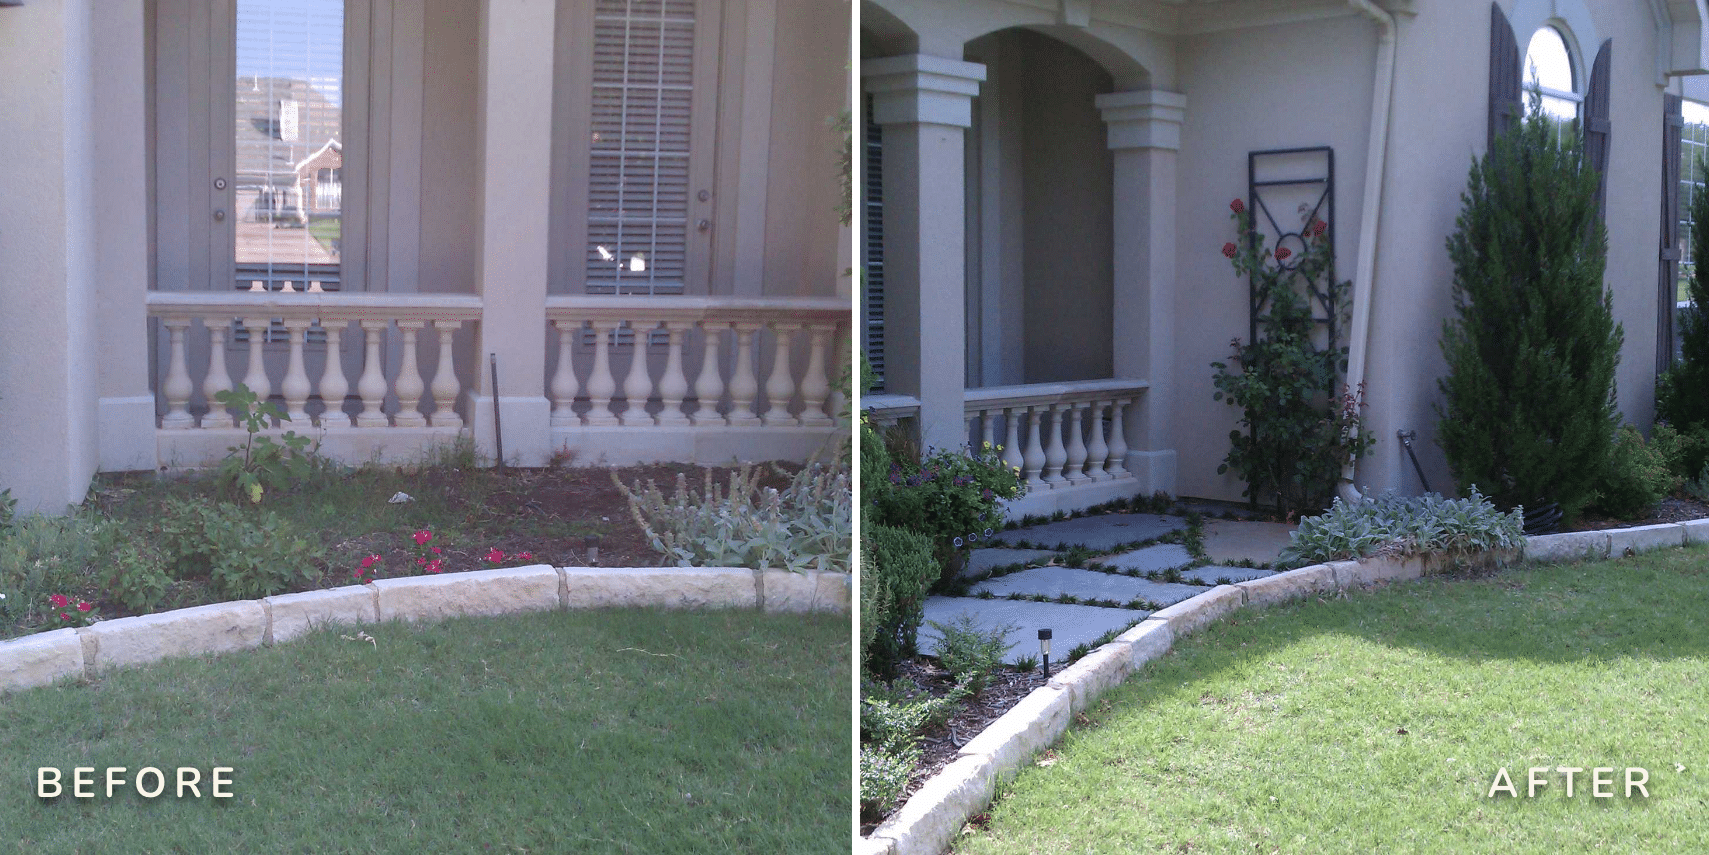 Before and After Image of Yard with boing plants before and many flowers and plants after